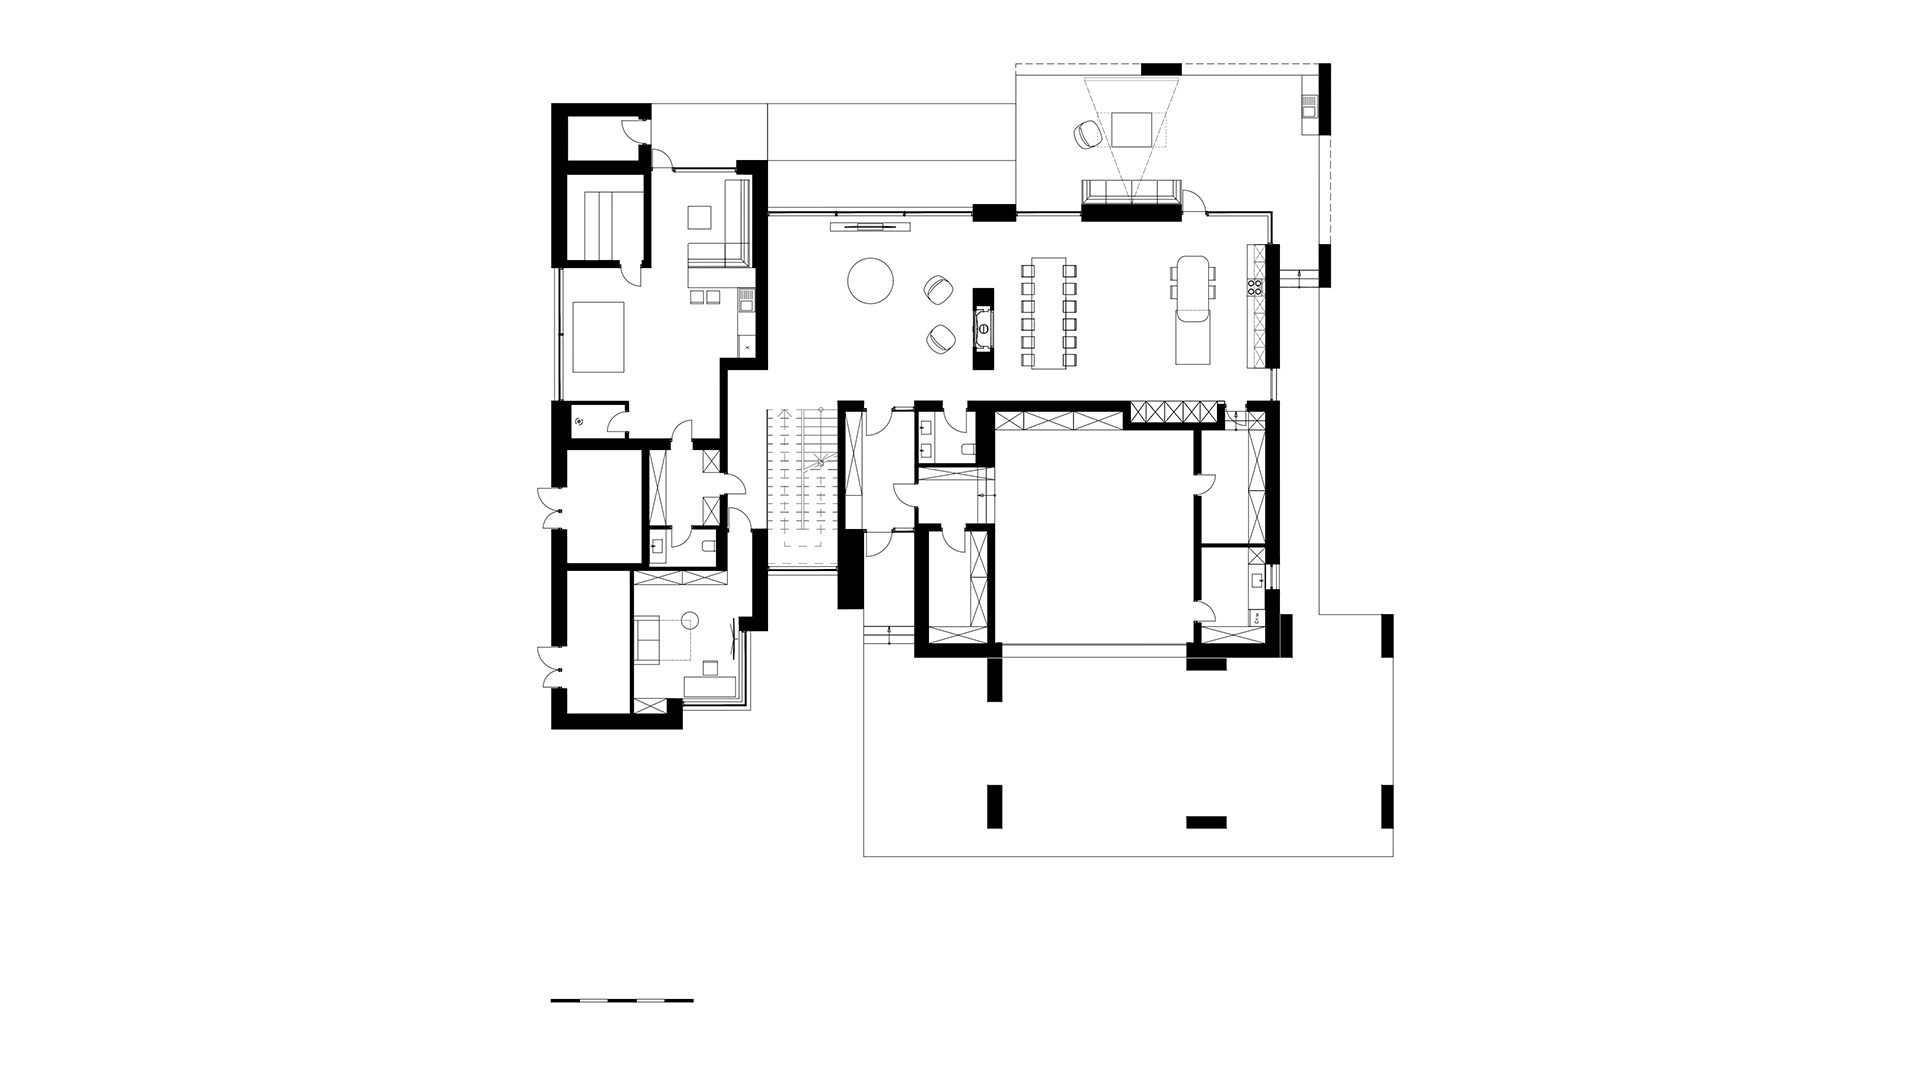 Layout of a two-storey house